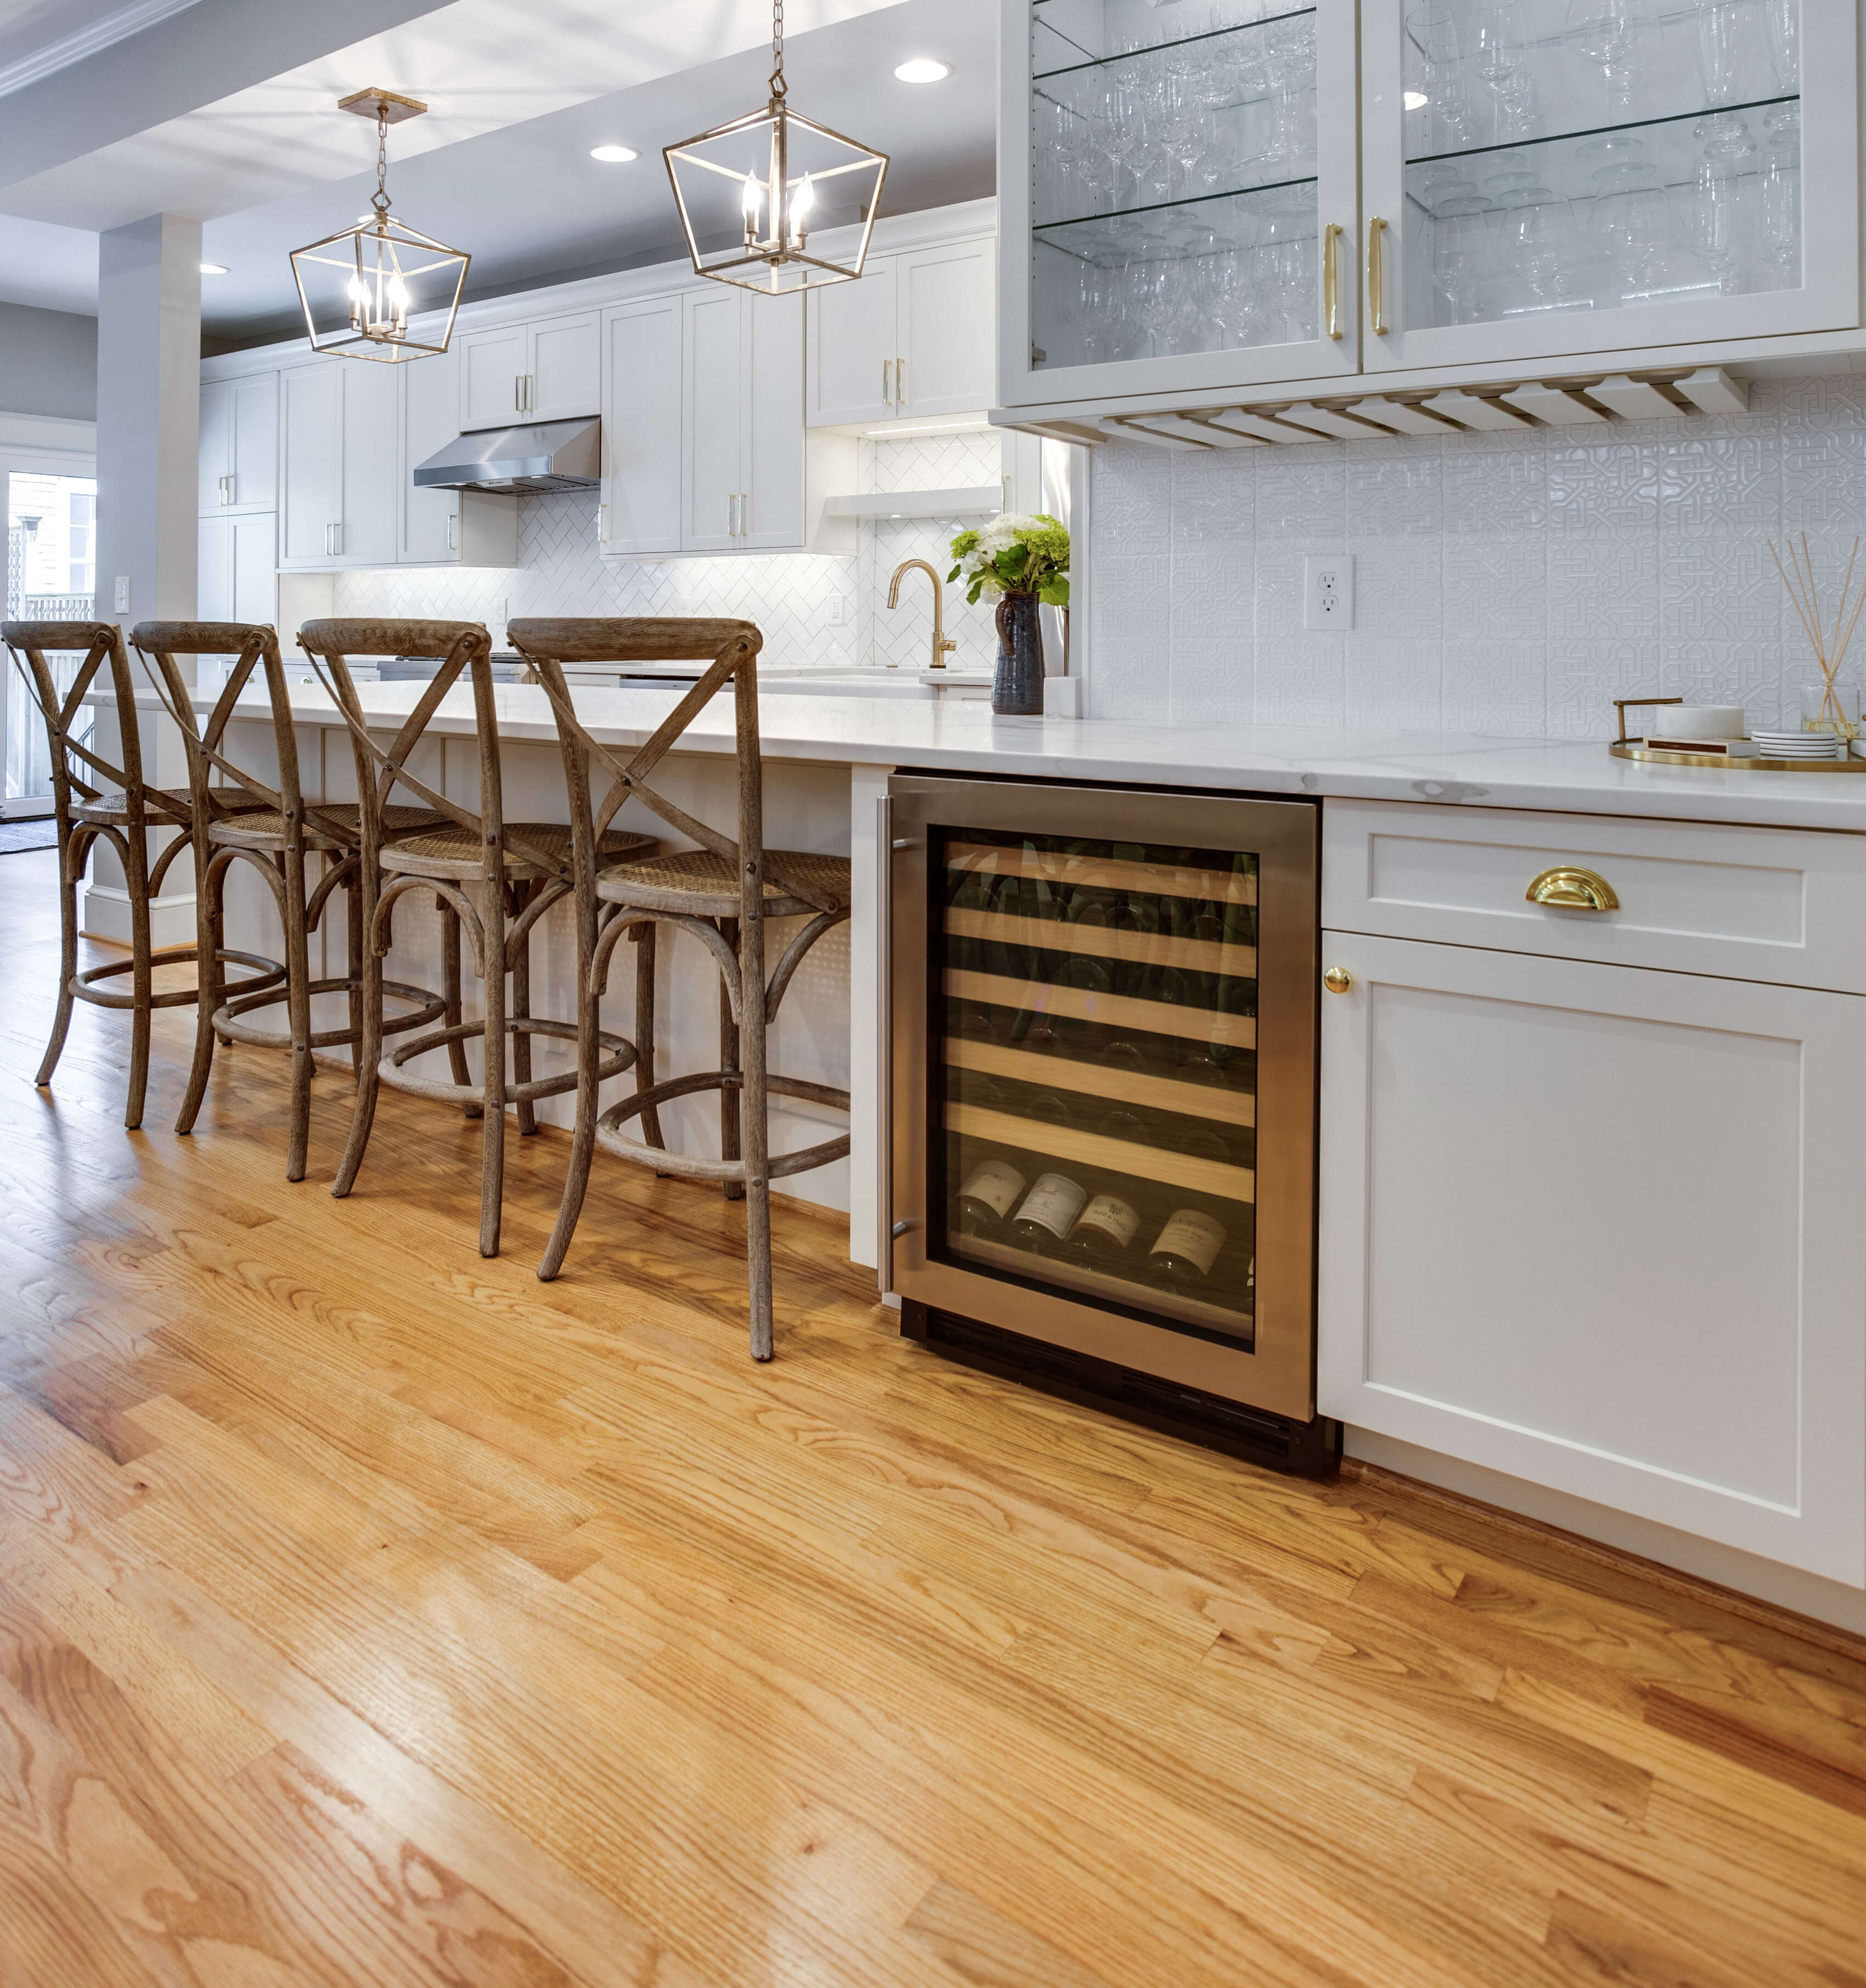 Natural wood floors in a remodeled kitchen with beautiful white painted shaker cabinets.